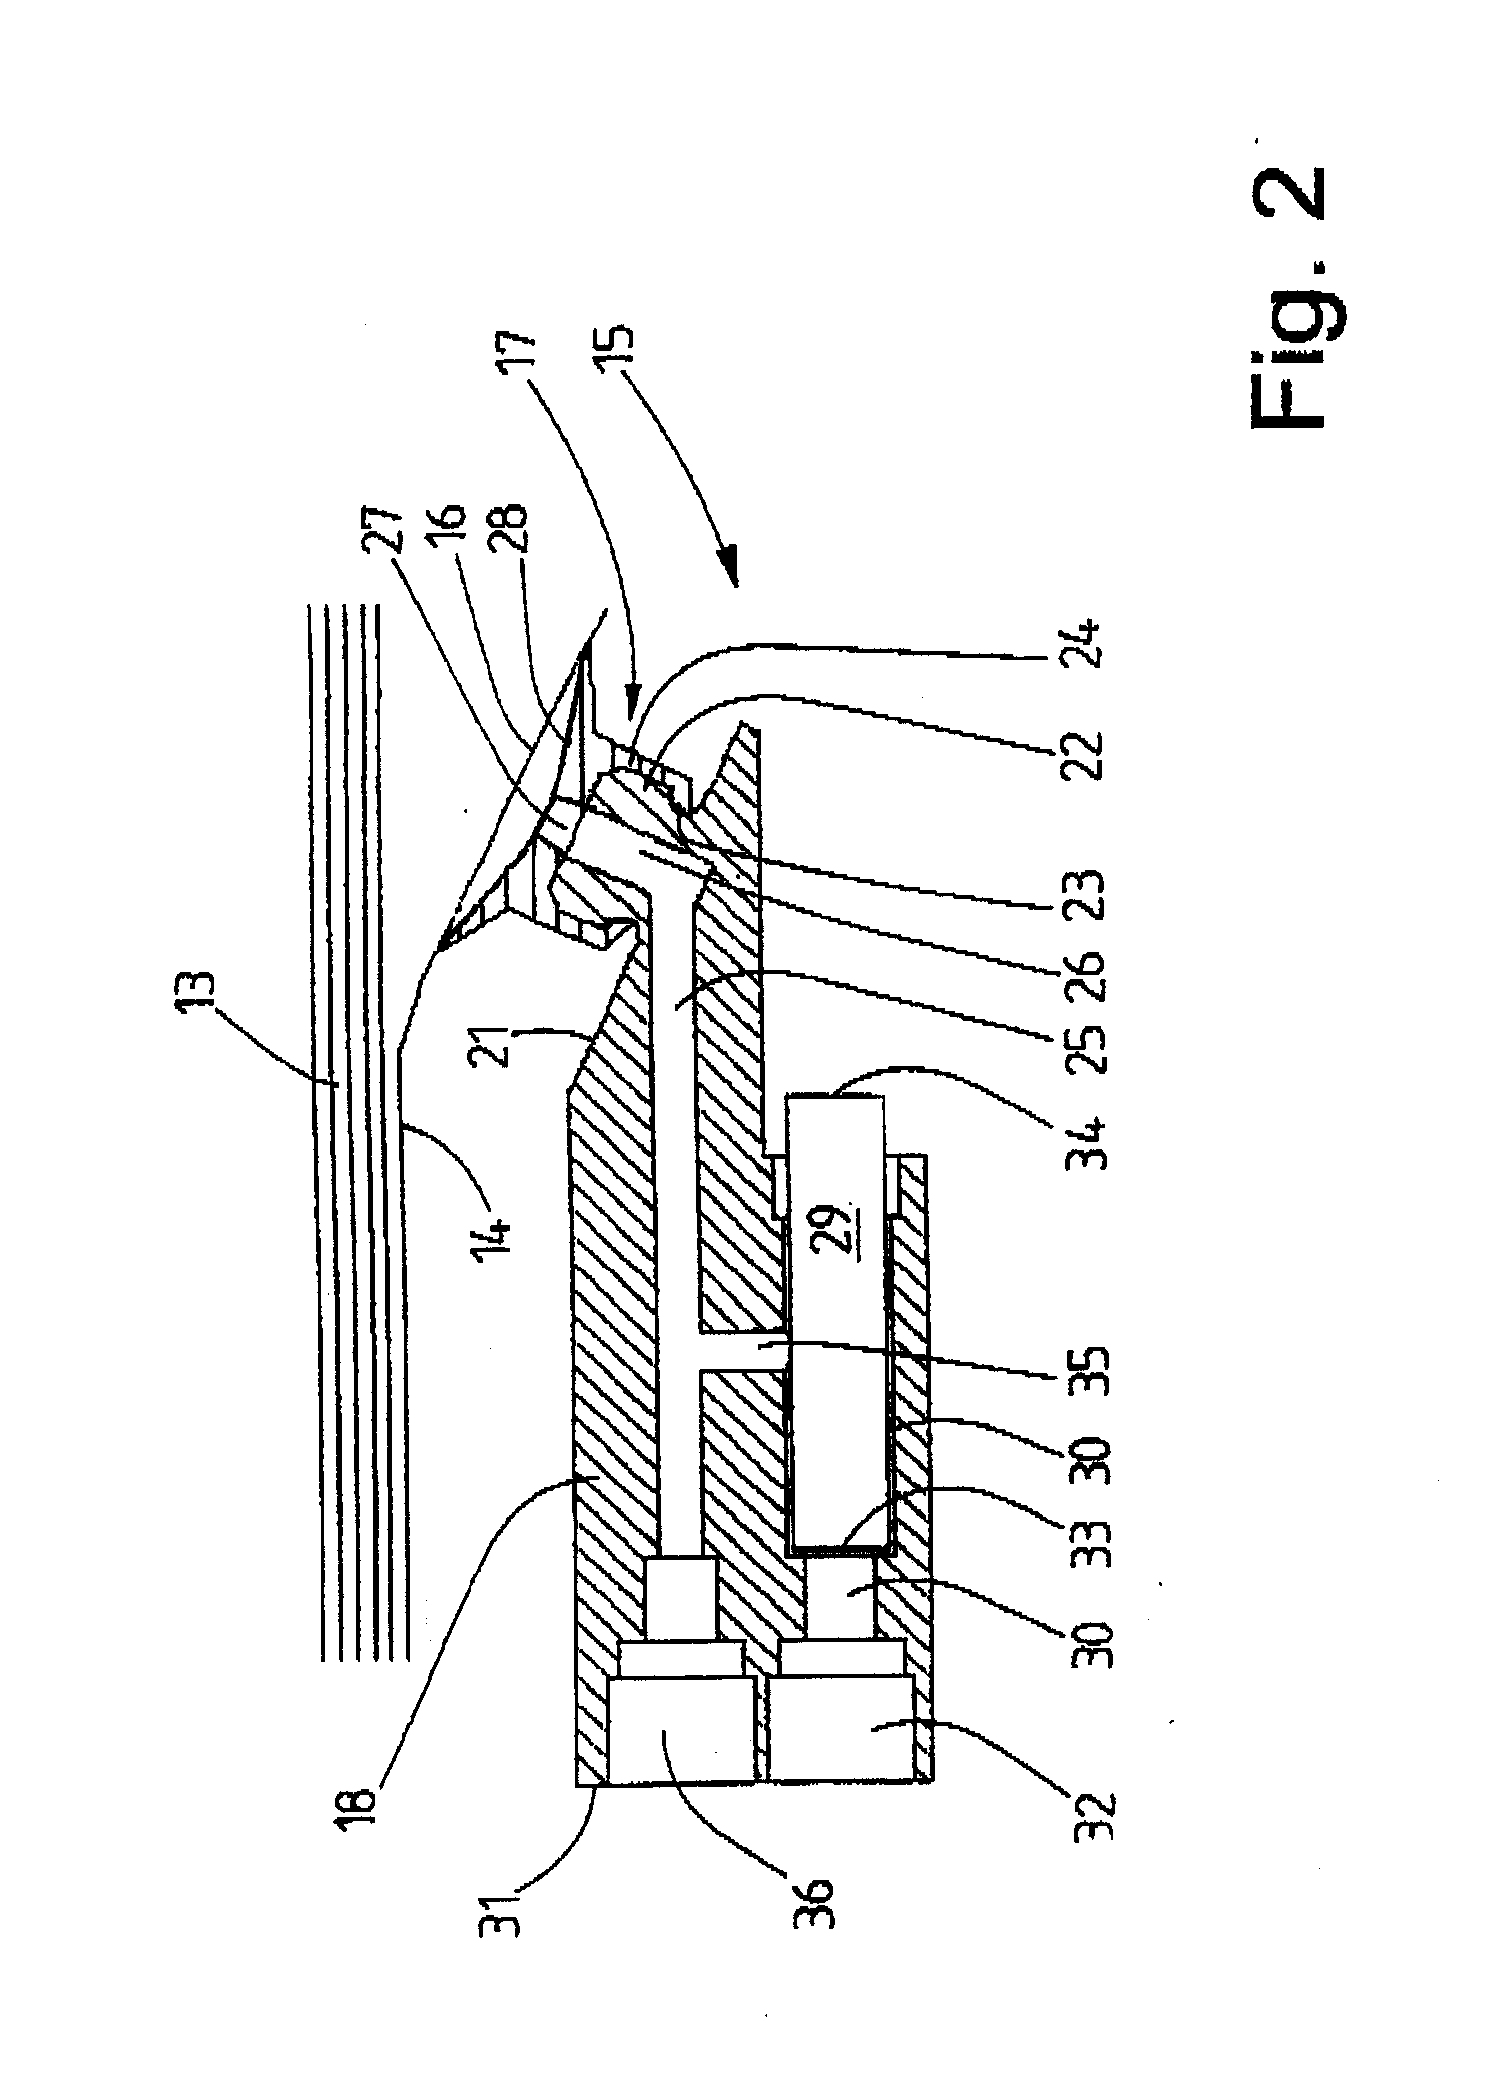 Apparatus for tilting away a part of a signature to be separated from a rack